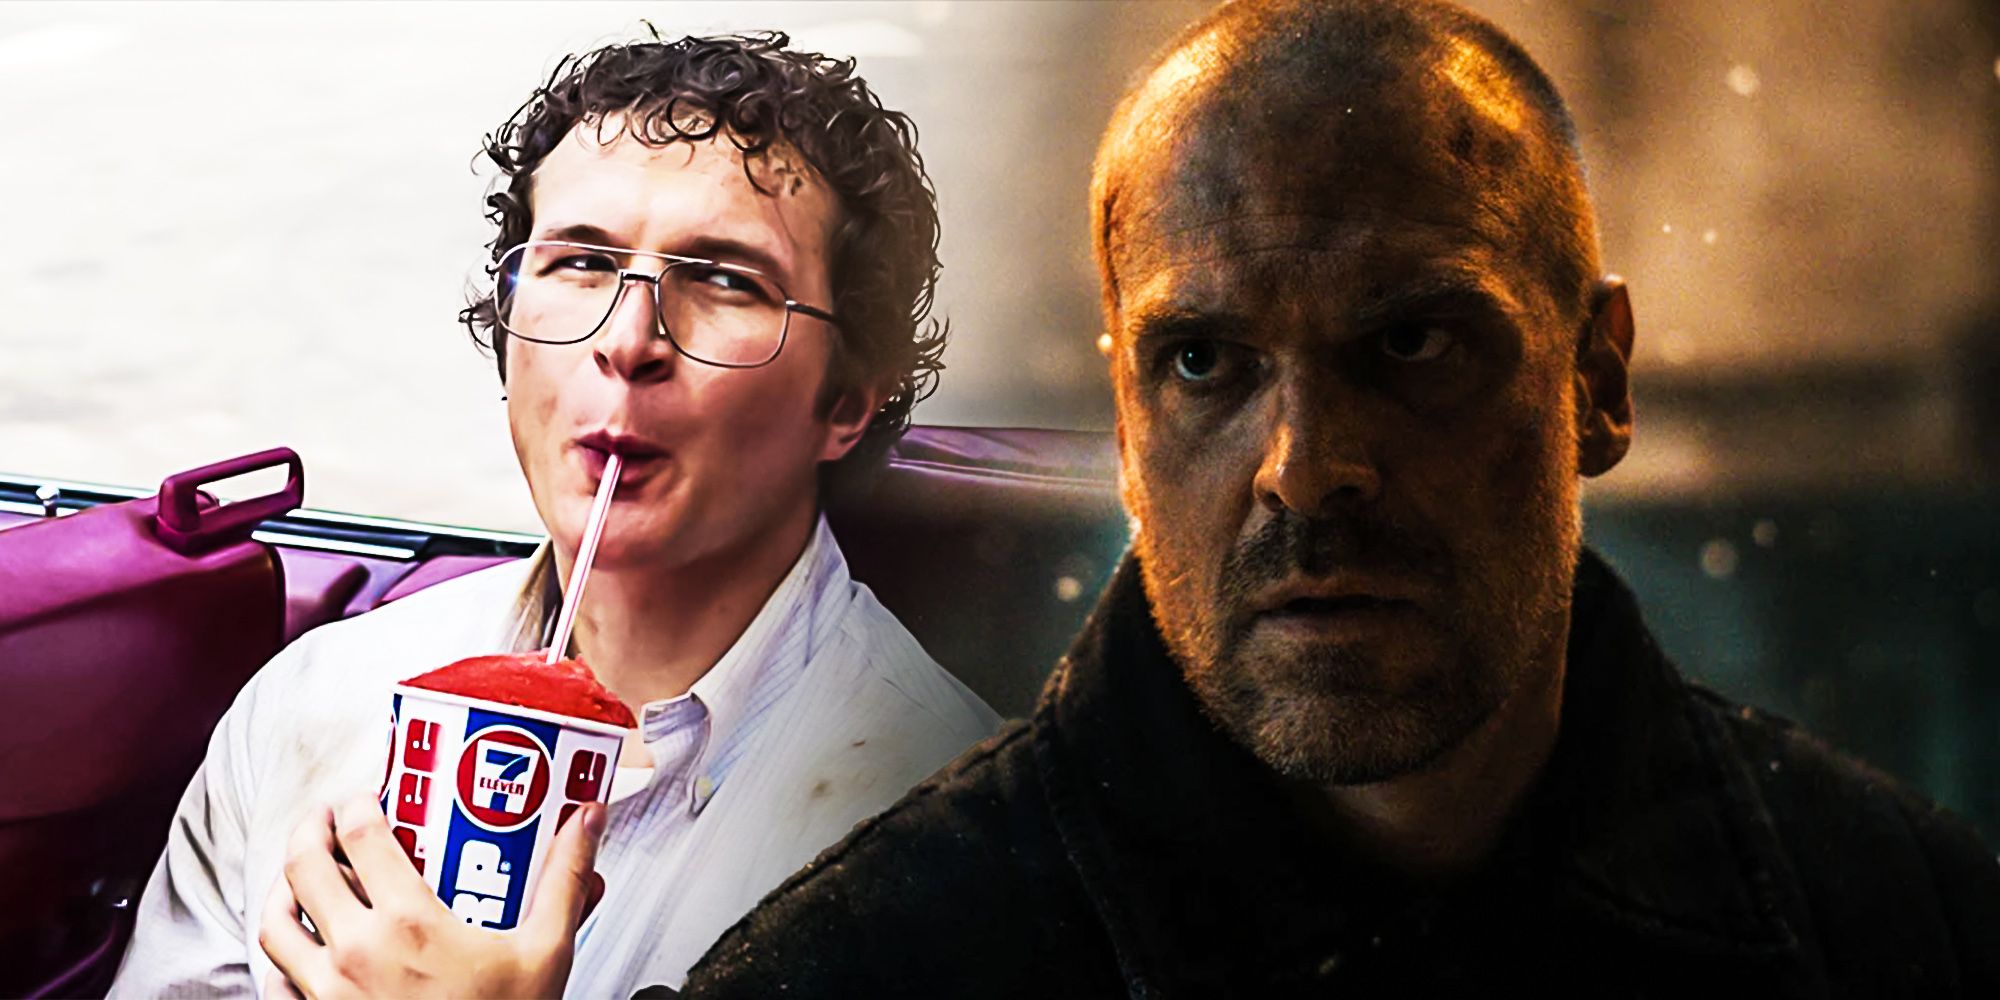 Stranger things season 4 russia tease hints at Justice for Alexei